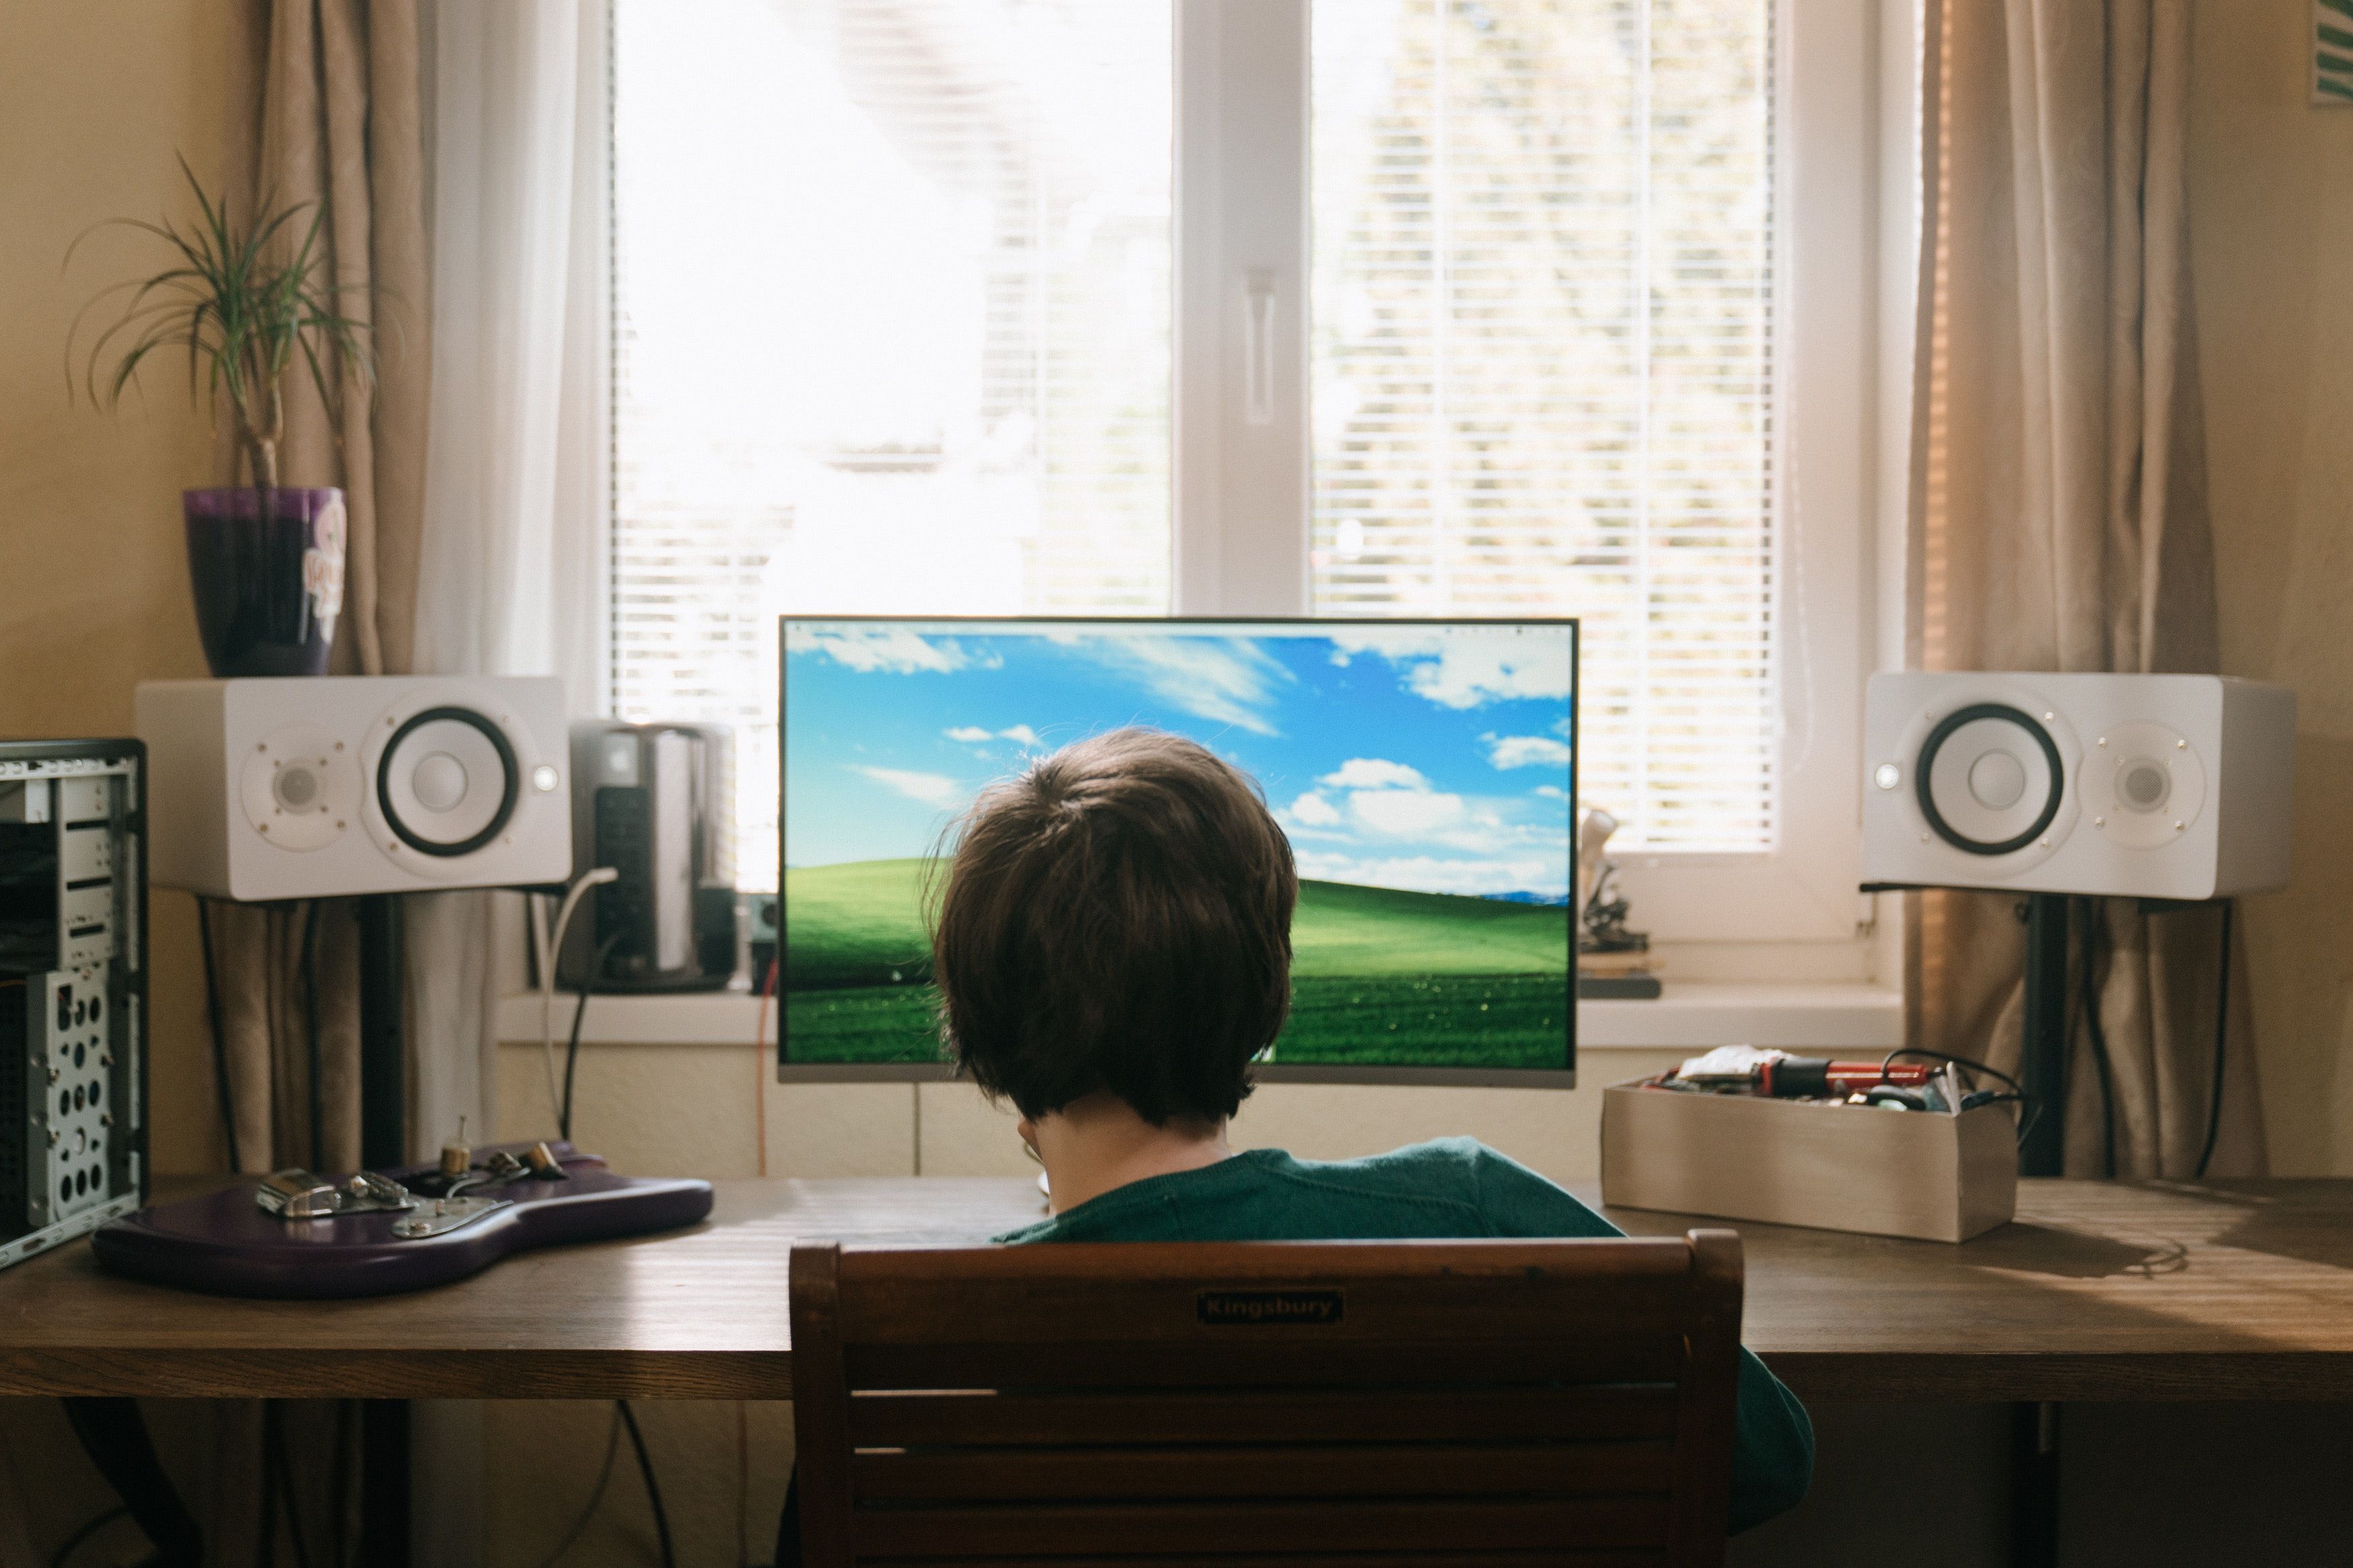 A boy in a red shirt sitting on a chair in front of a black flat screen television